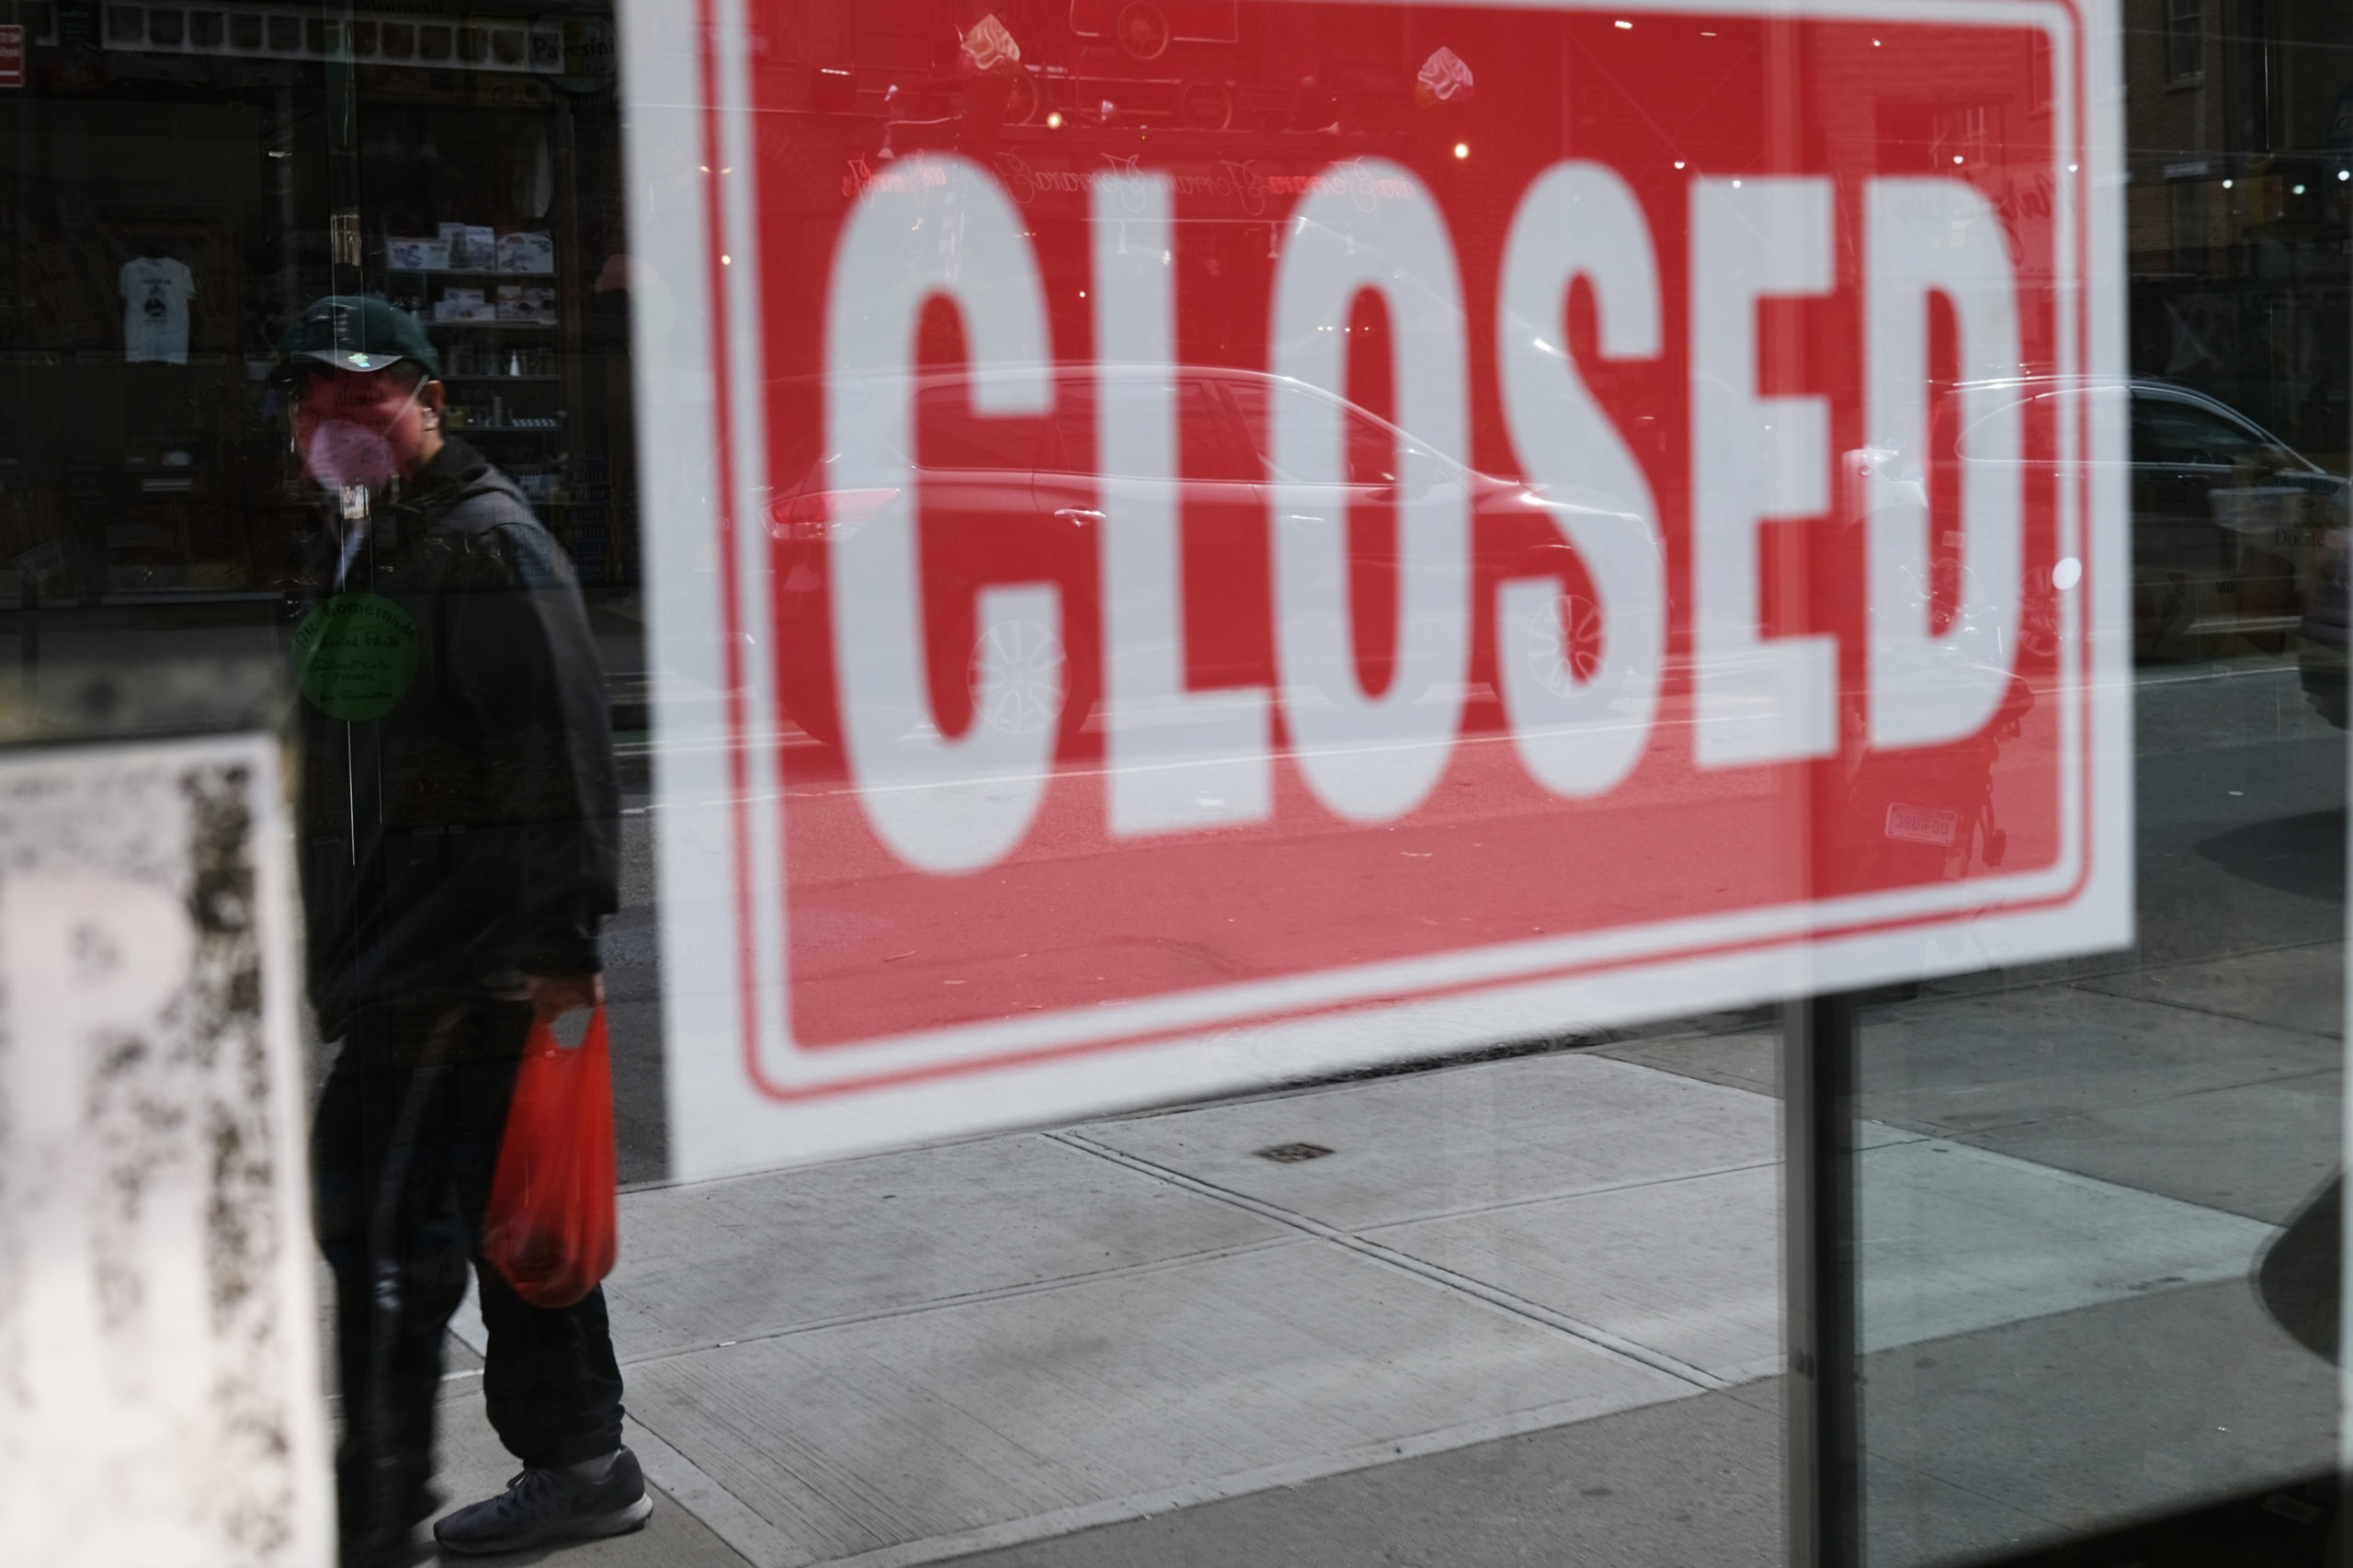 NEW YORK, NY - APRIL 21: A store stands closed as the coronavirus keeps financial markets and businesses mostly closed on April 21, 2020 in New York City. New York City, which has been the hardest hit city in America from COVIT-19, is just starting to see a slowdown in hospital visits and a lowering of the daily death rate from the virus. (Photo by Spencer Platt/Getty Images)